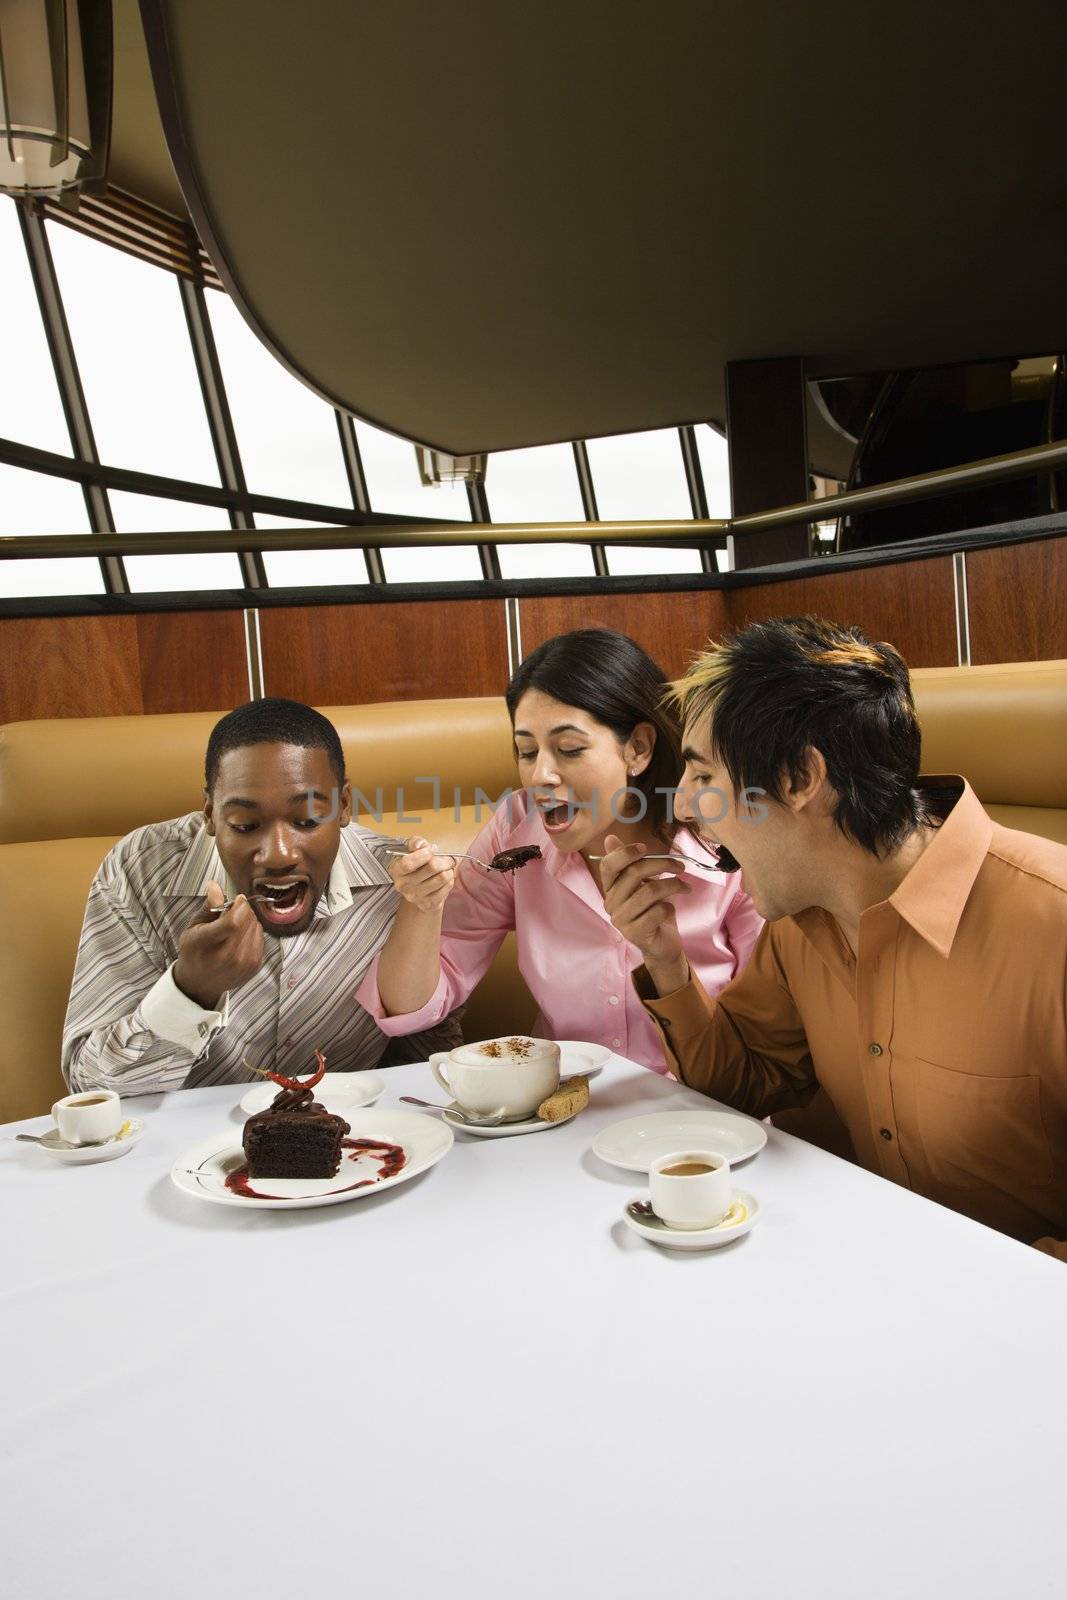 Small group of mid adult friends eating dessert at a restaurant.